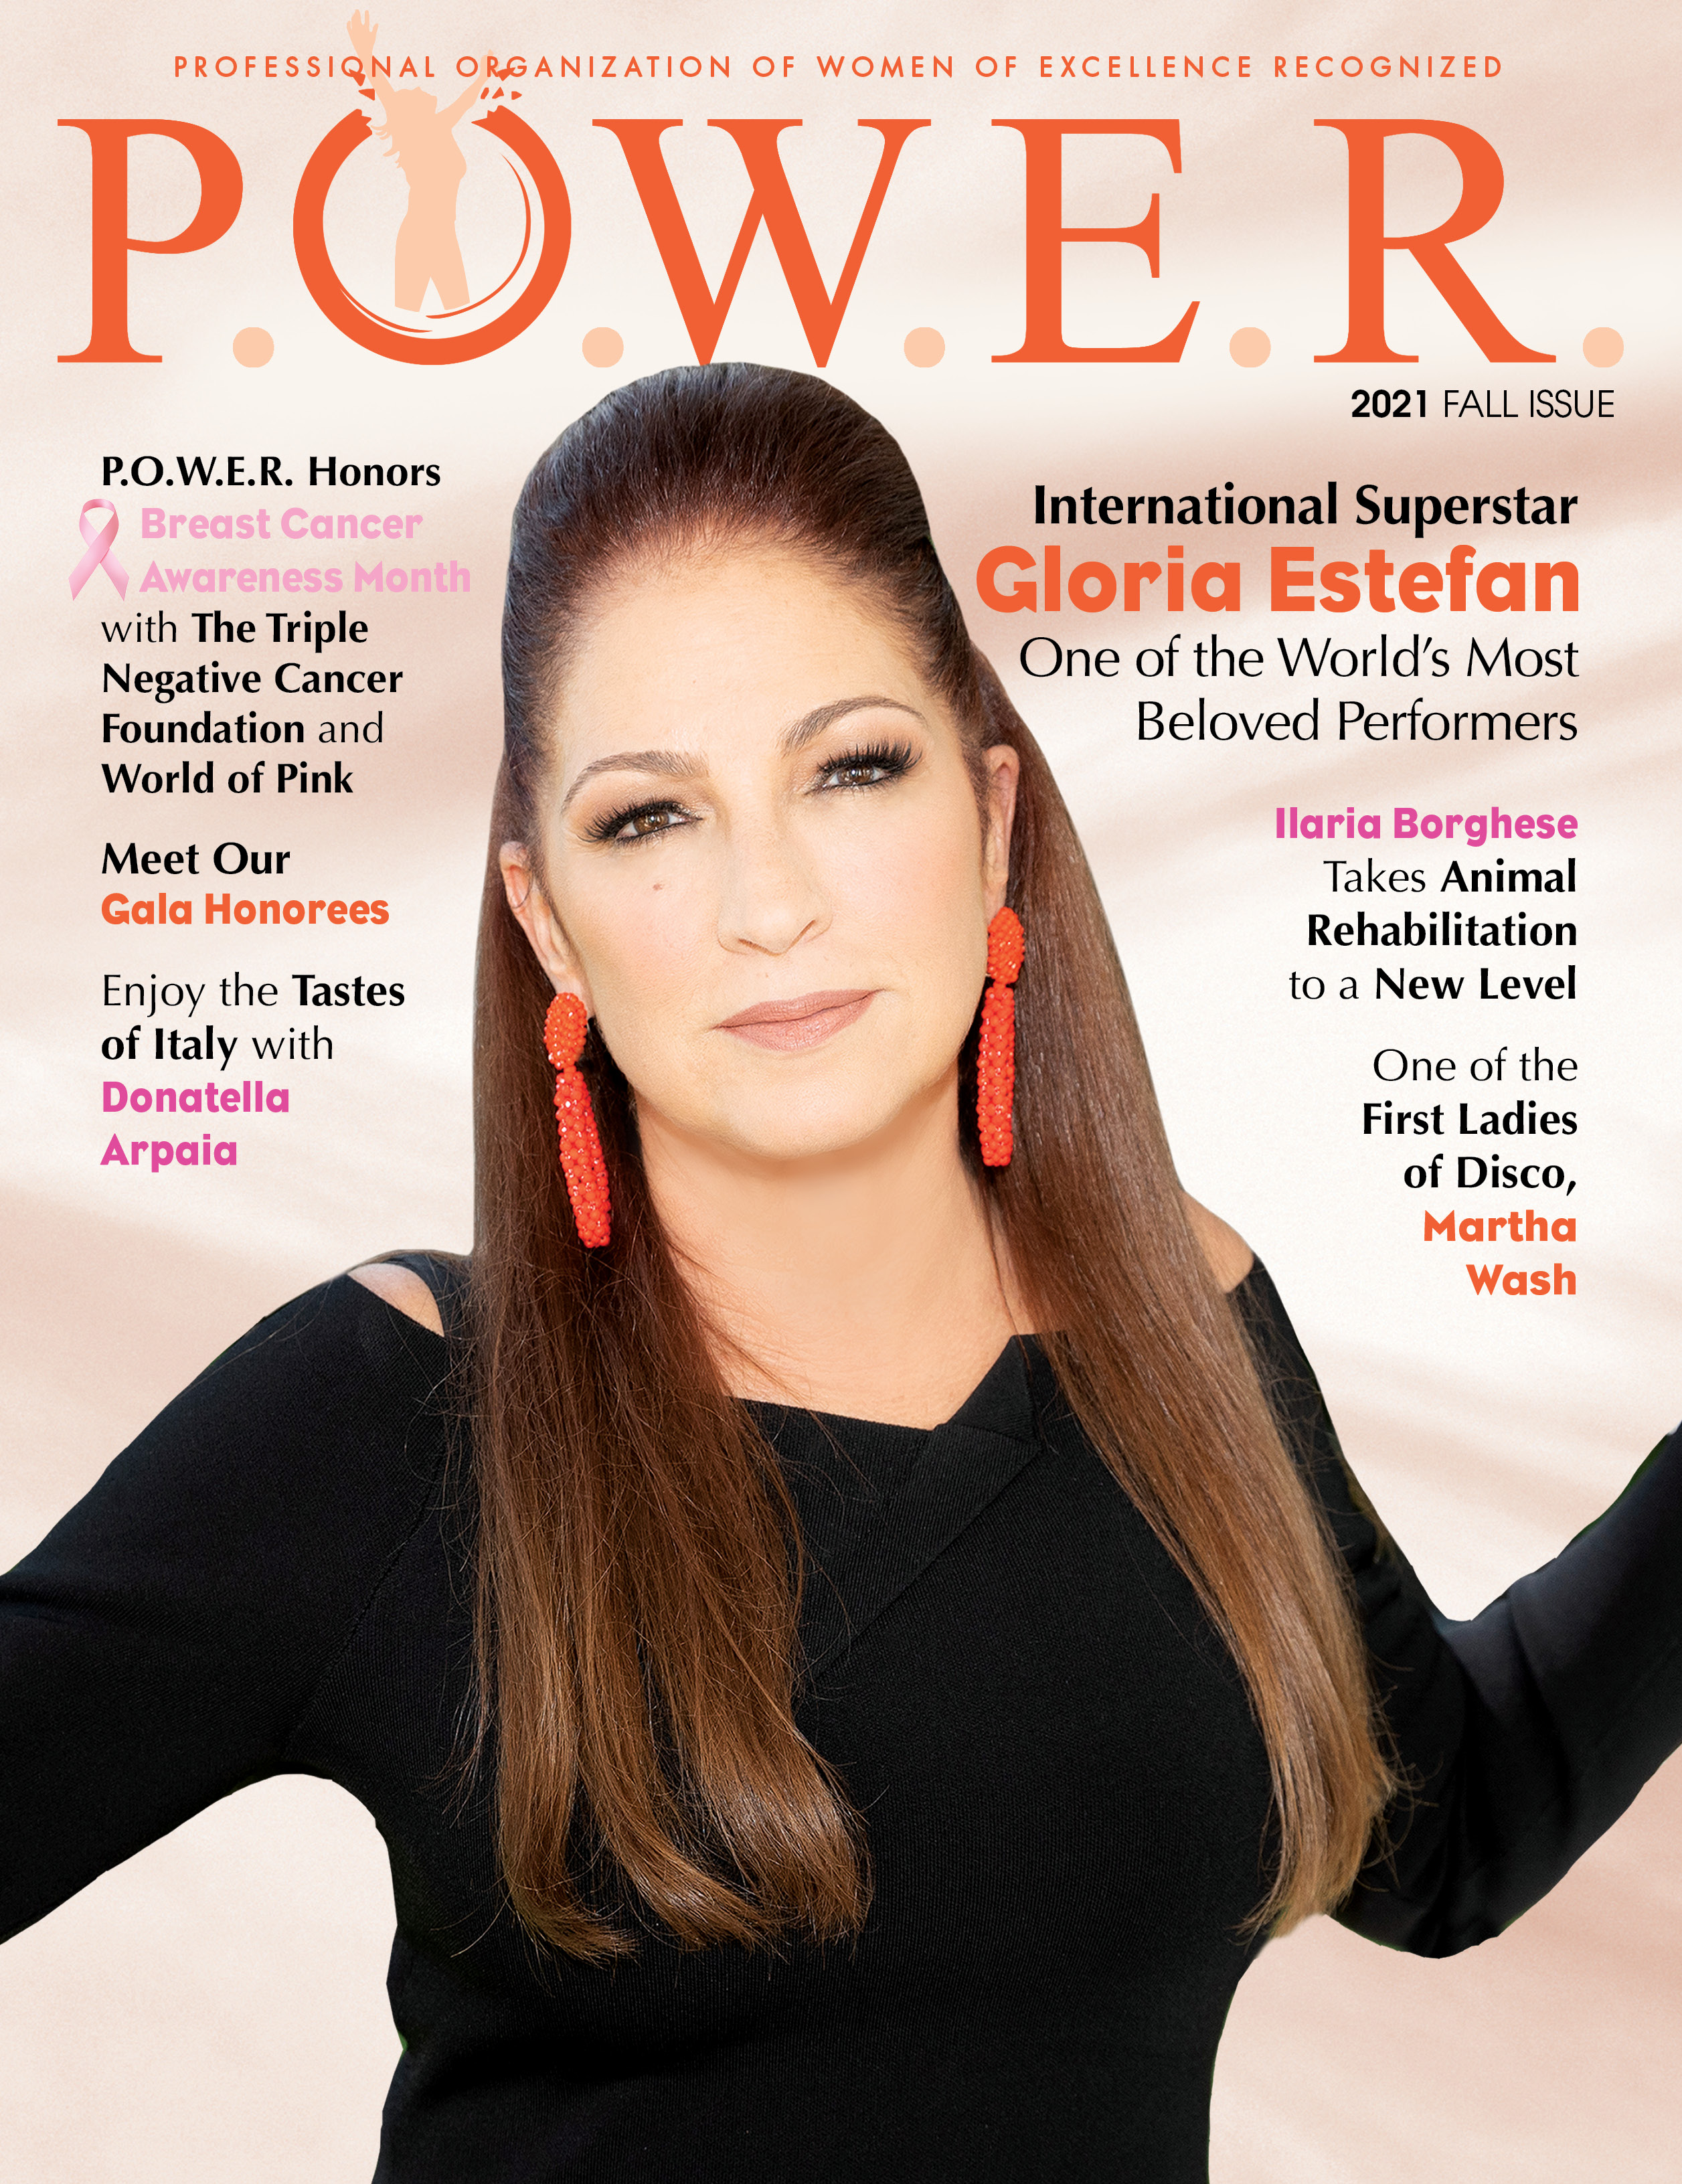 POWER Magazine Fall 2021 issue features women who prove they can achieve their goals with passion and hard work